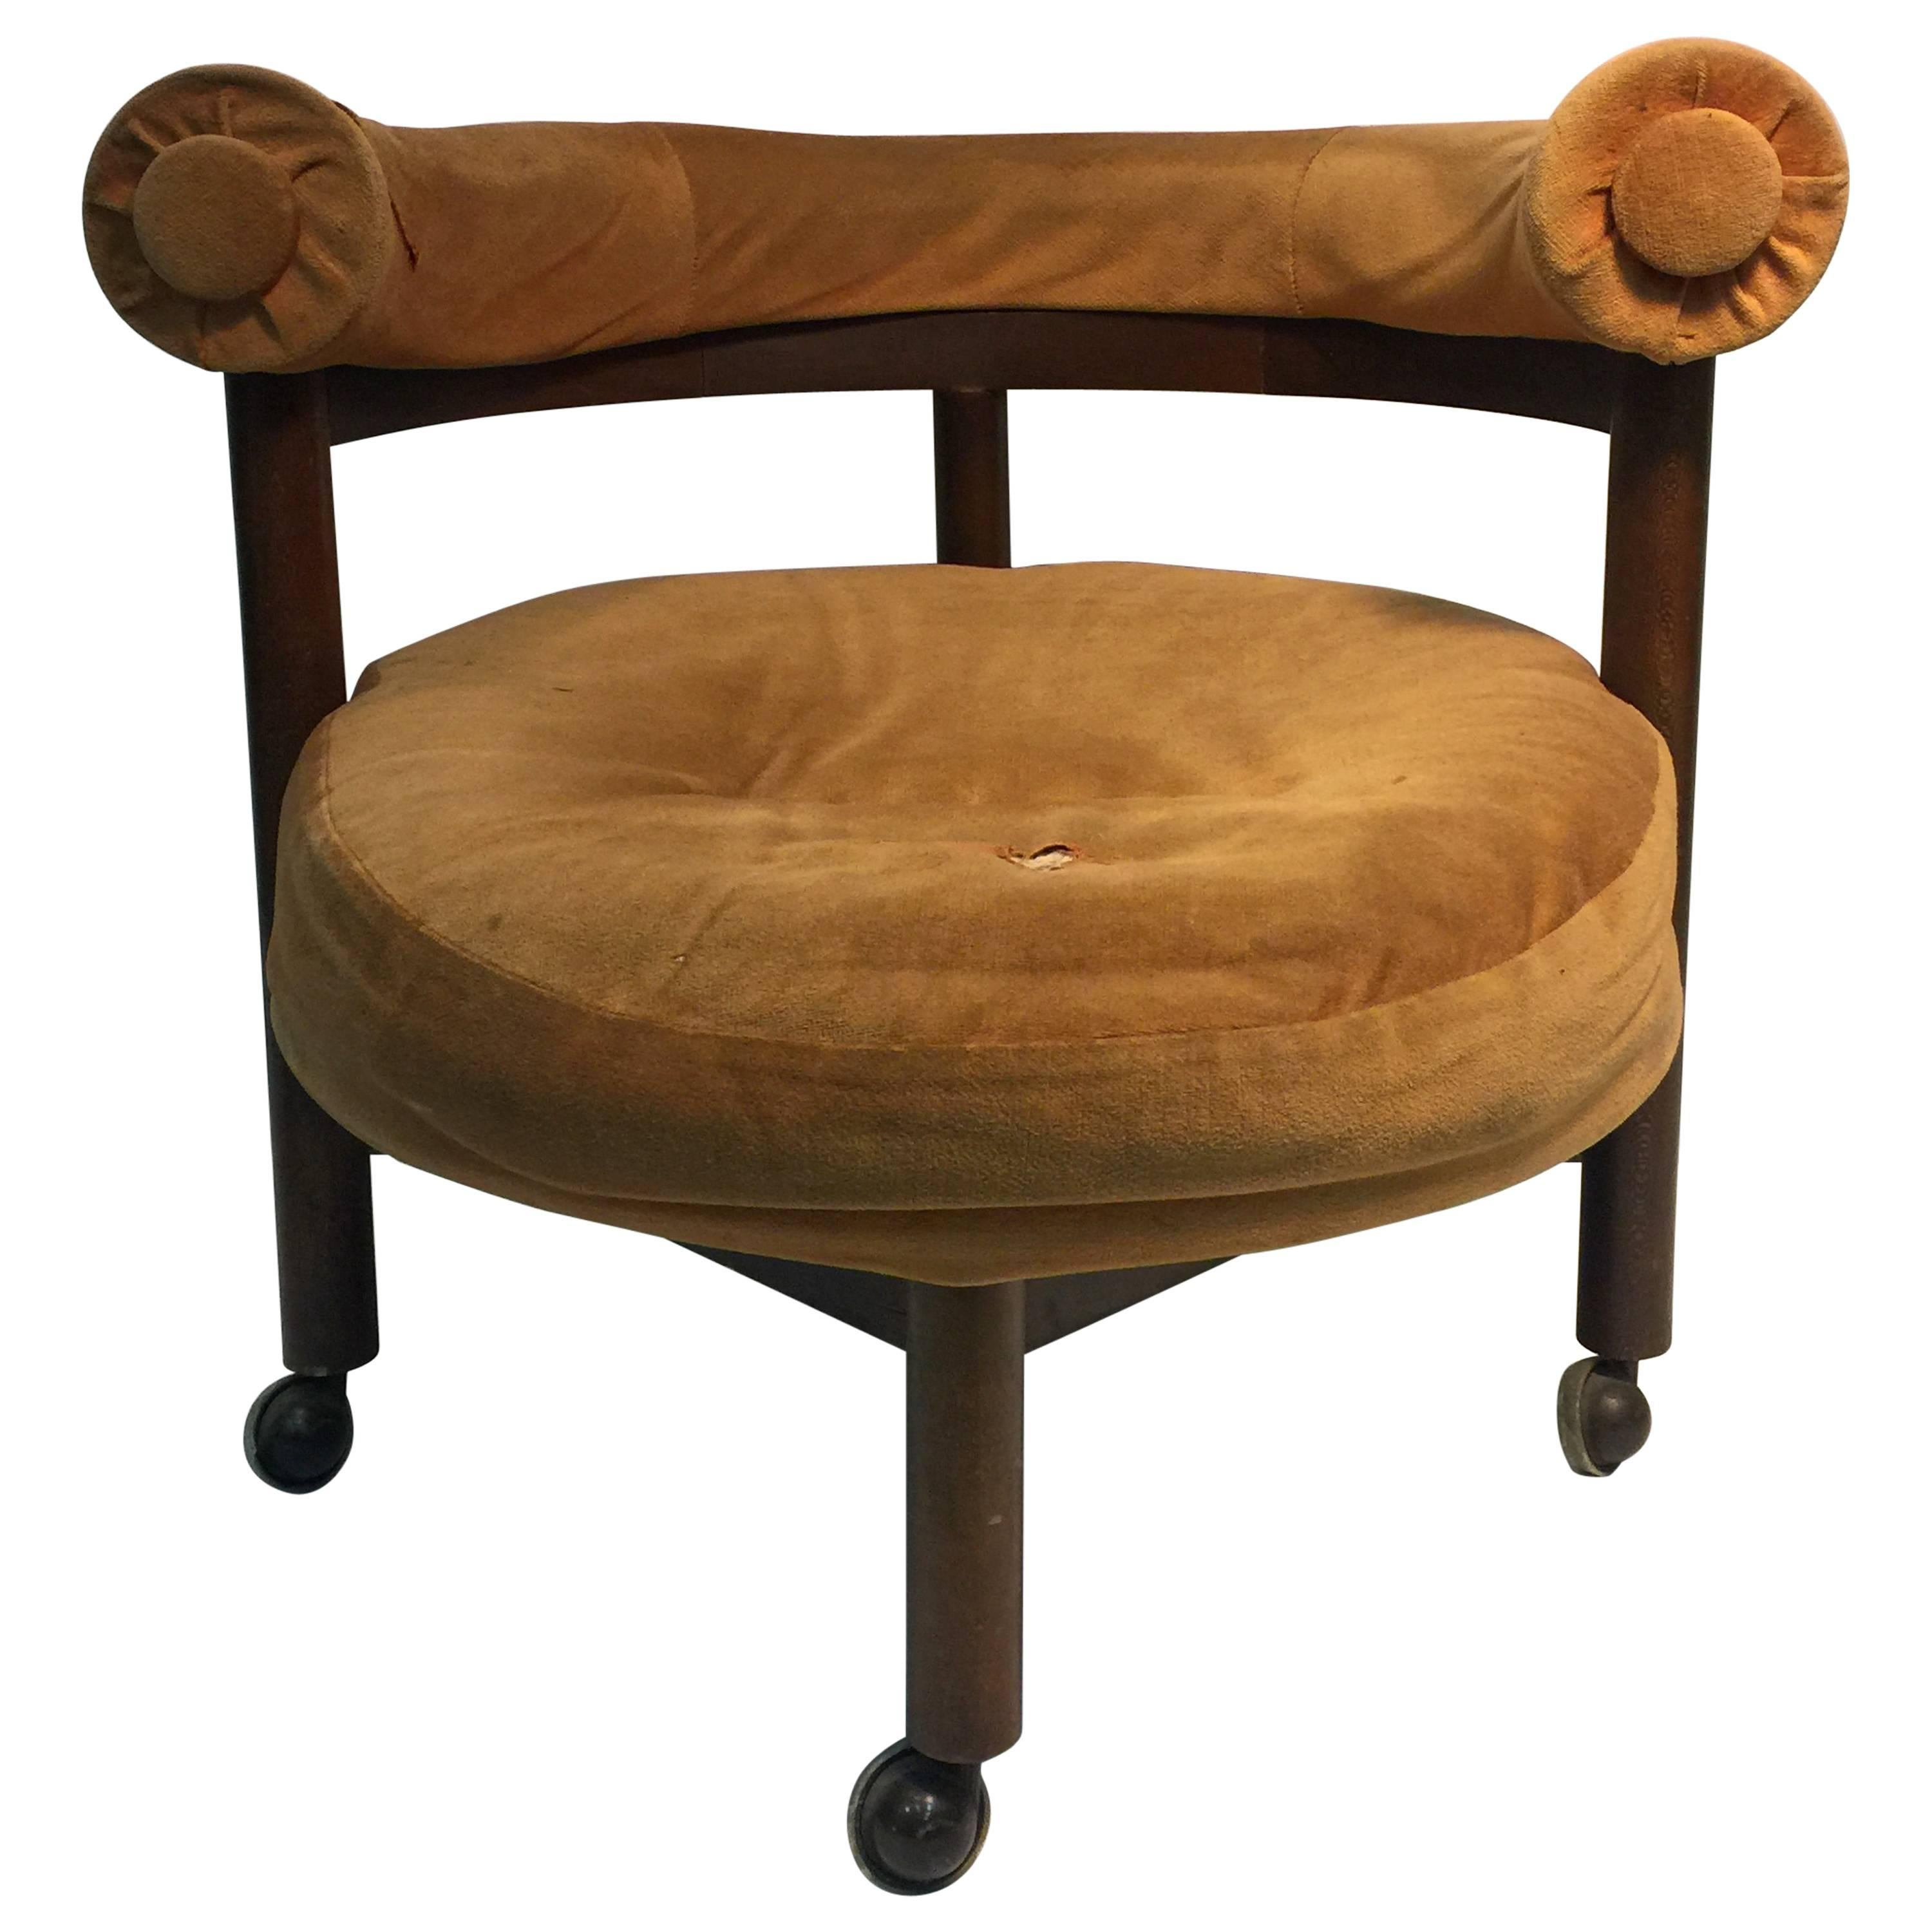 Unusual Danish Modern Round Chair in the Manner of Hans Wegner For Sale